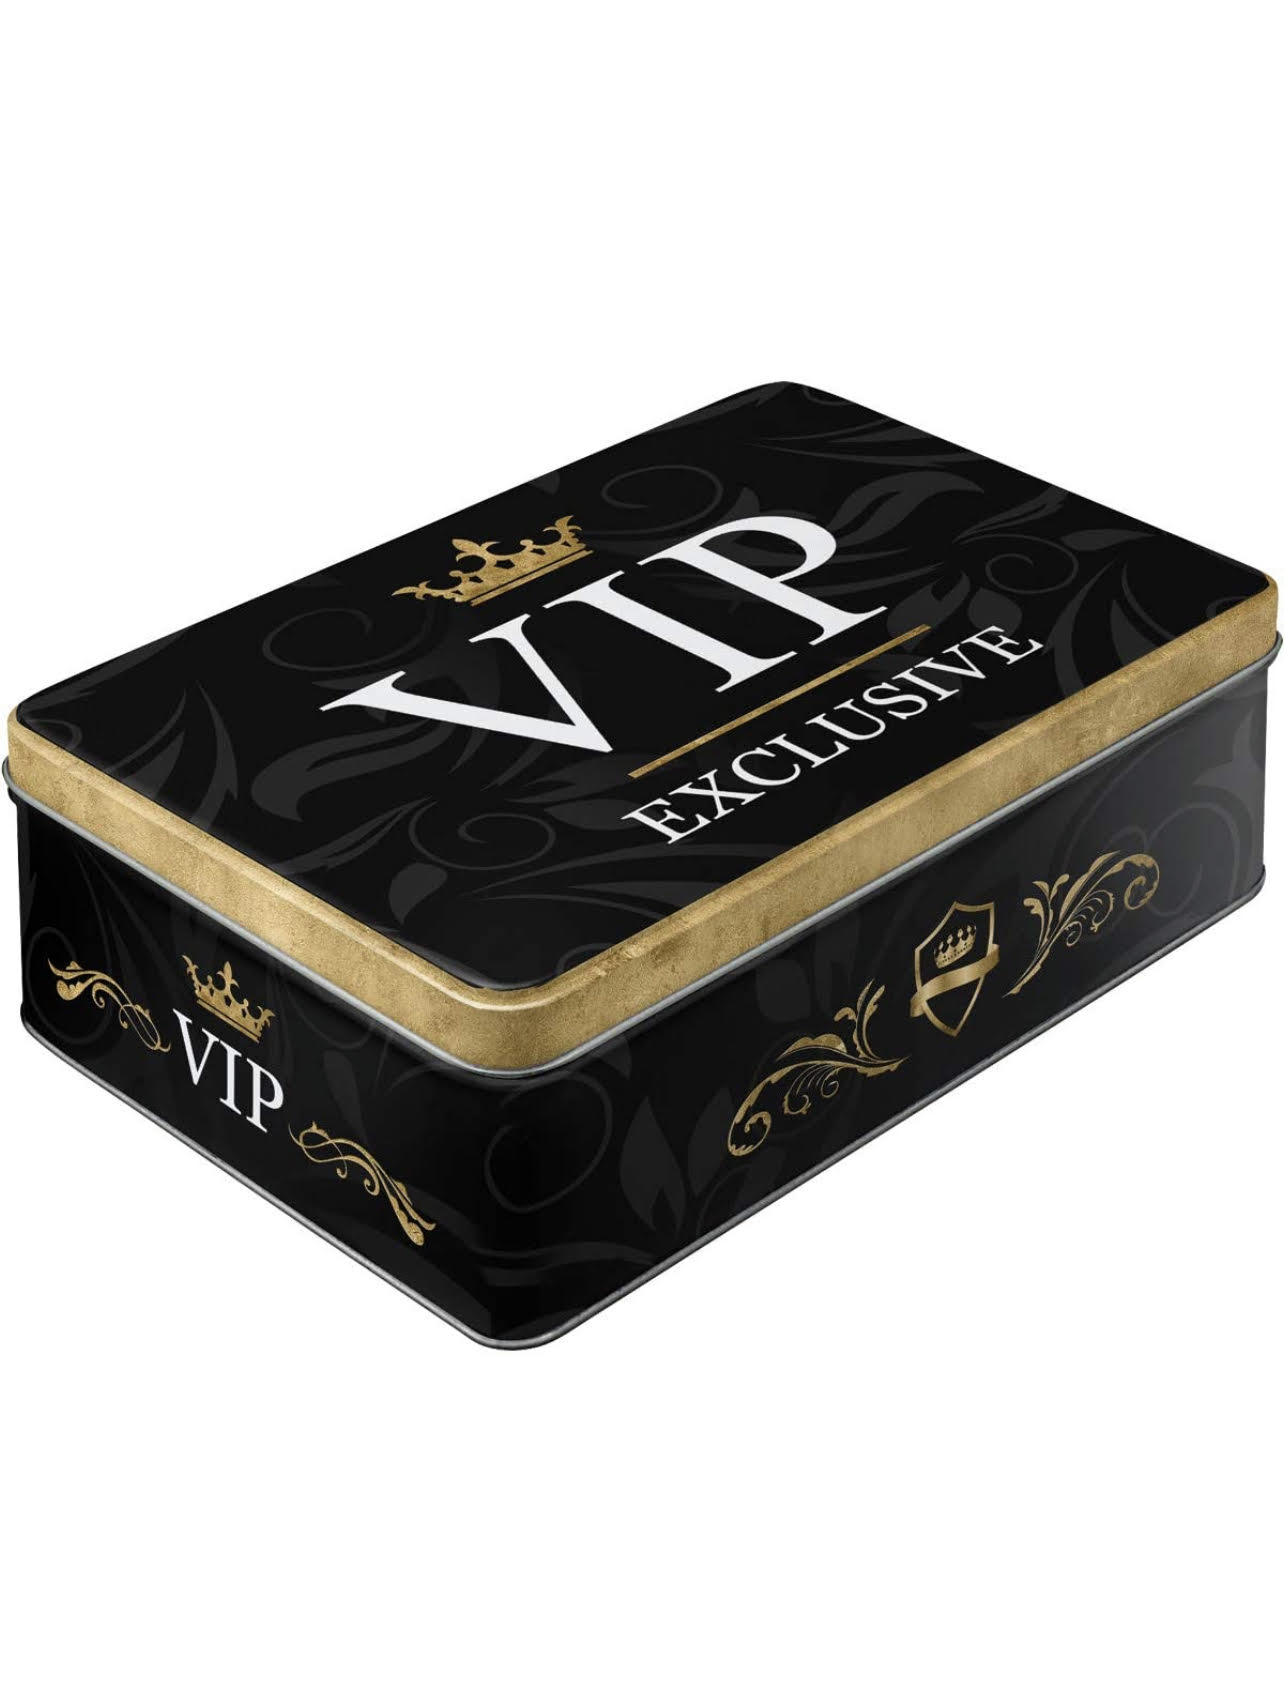 Rif_104 Vip Exclusive Candy